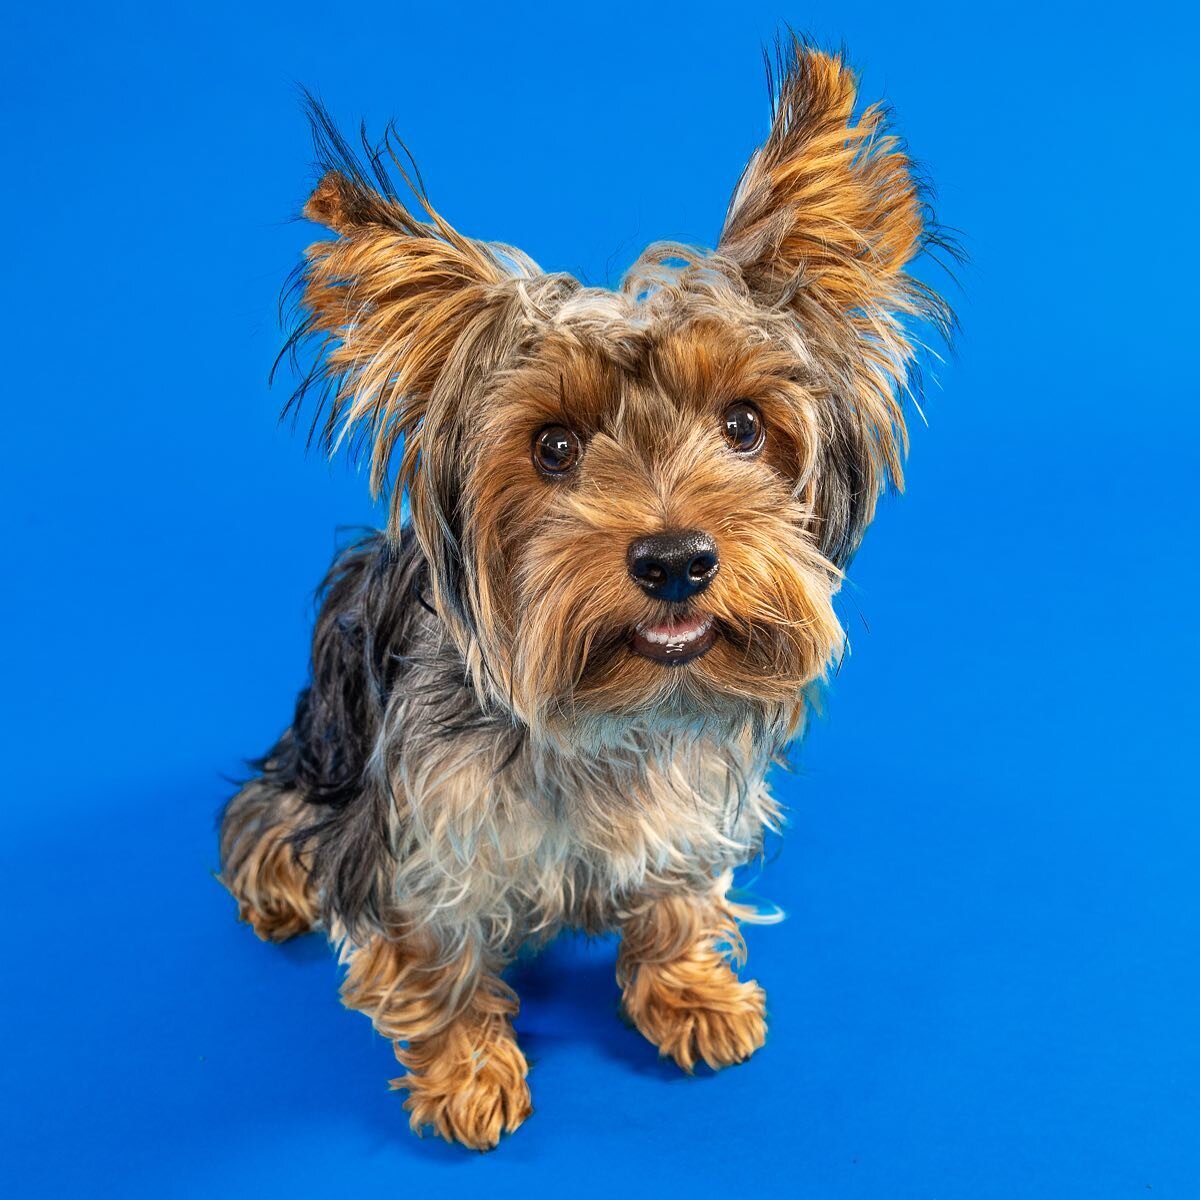 Cookie! Paws-ably the worlds biggest Yorkie&mdash;but we&rsquo;re not sure. Cookie was tons of fun in the studio and full of personality! That playful attitude totally came through and helped get us his FurEver Portrait! We love Cookie! 
.
.
.
.
.
#p